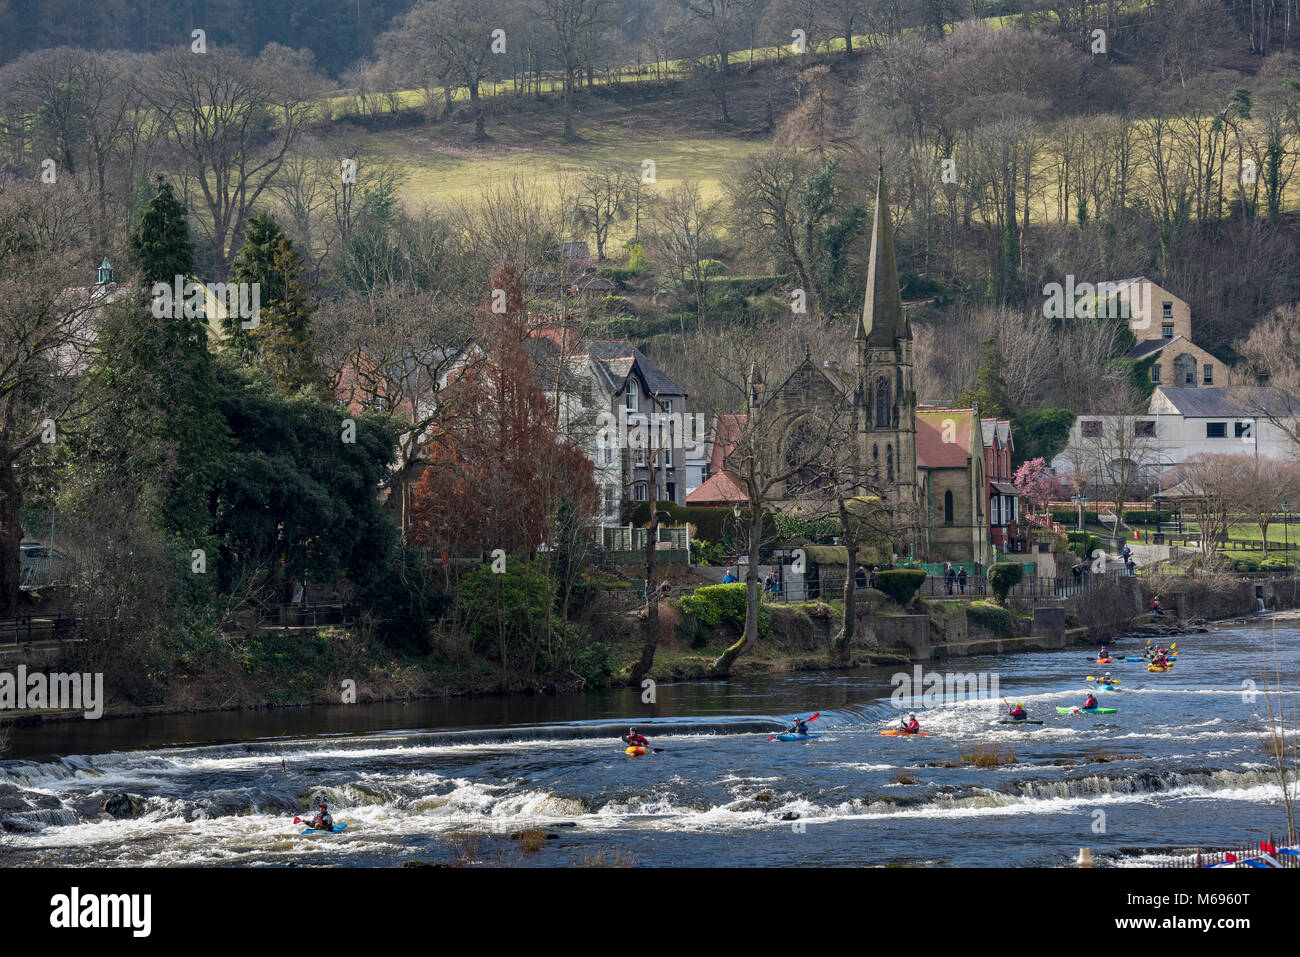 Llangollen is a small town and community in Denbighshire, north-east Wales, situated on the River Dee and on the edge of the Berwyn mountains. canoeis Stock Photo